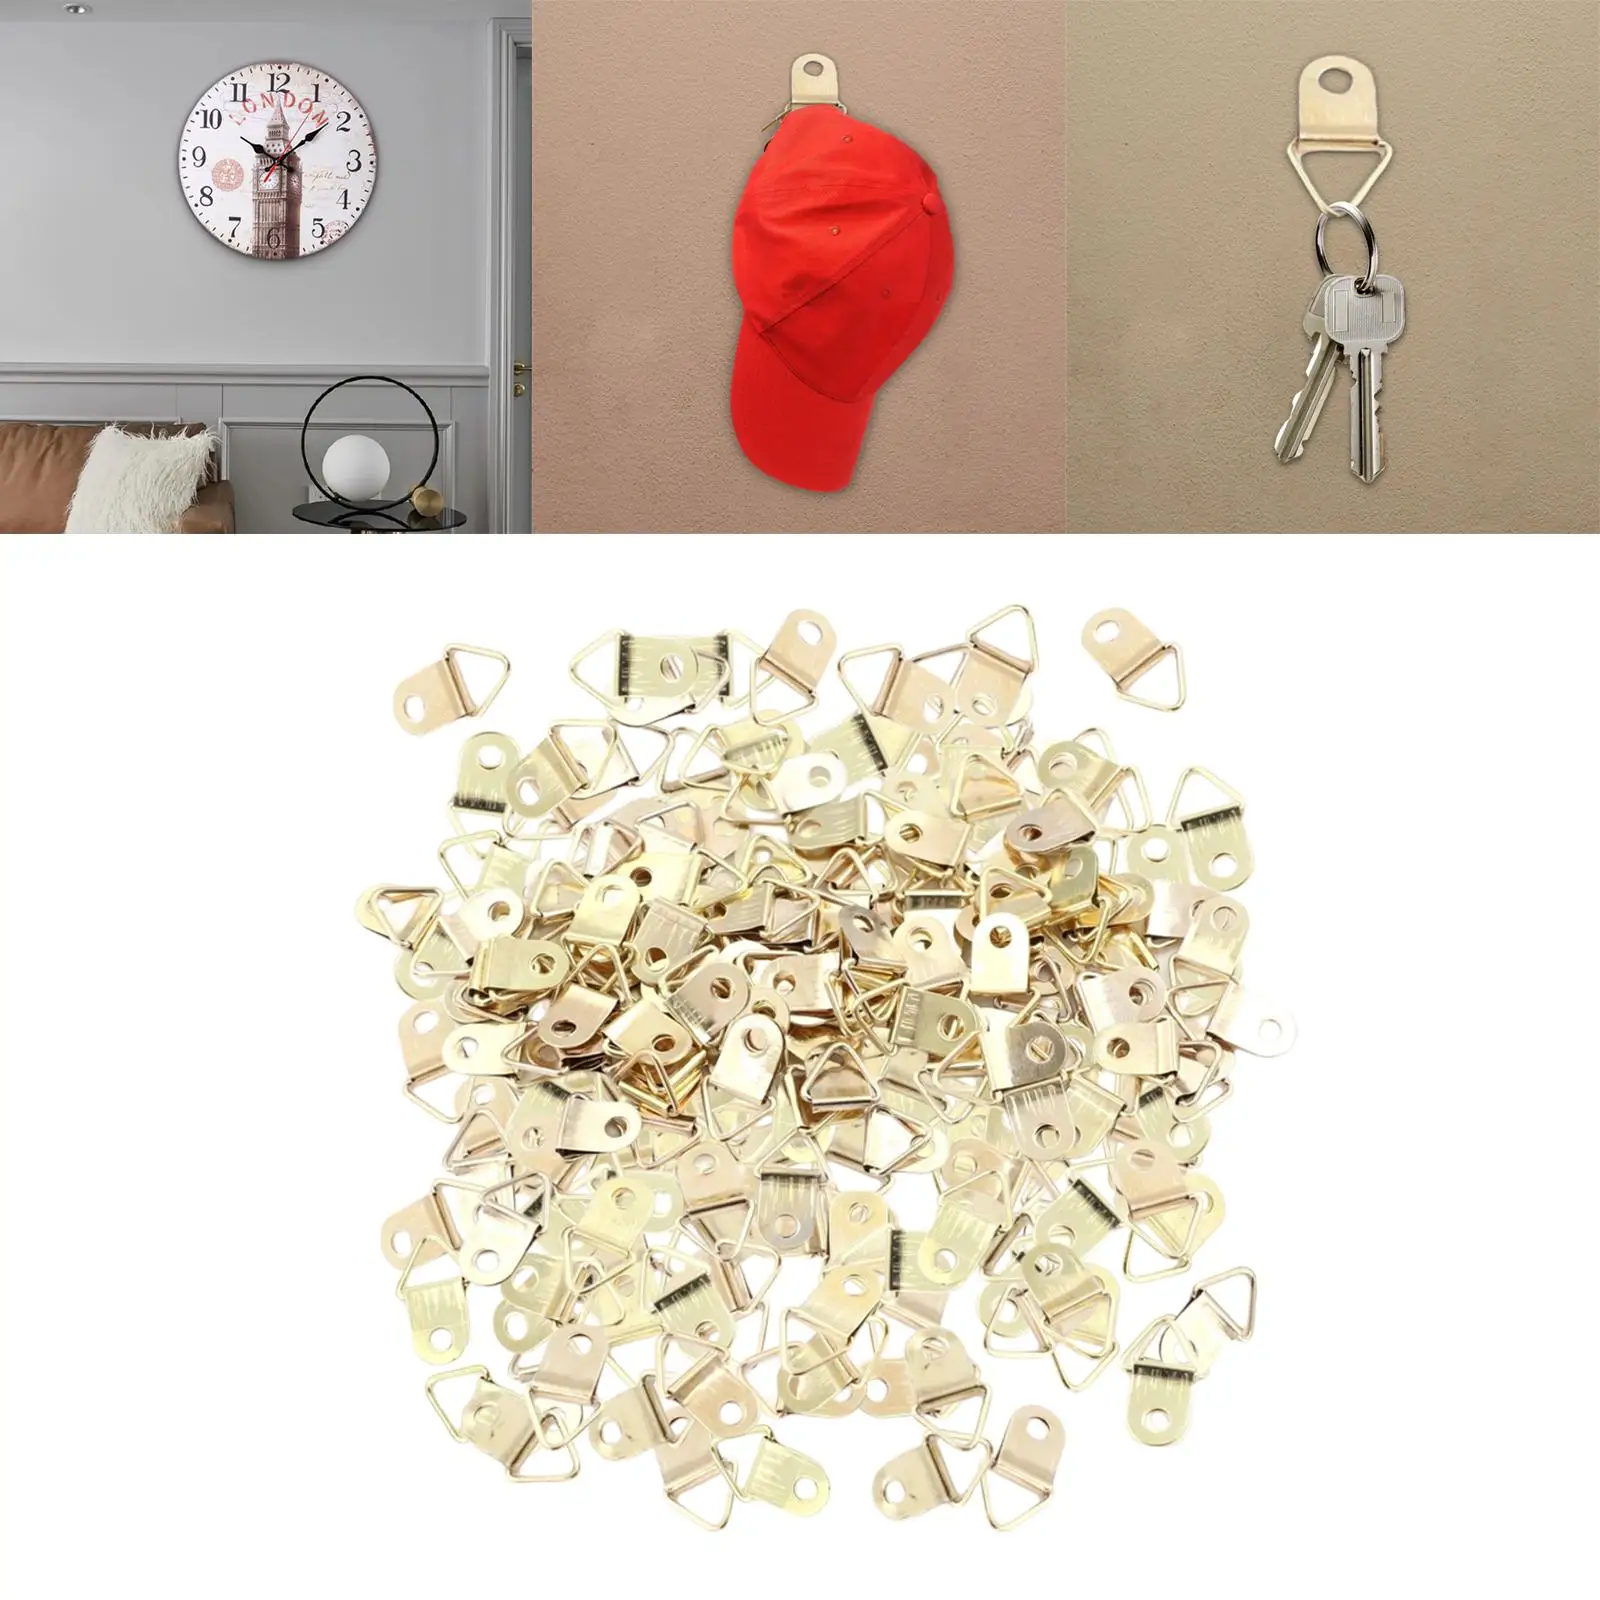 1000 Pieces Metal Picture Frame Hangers Kit Wall Hanging Clocks Hooks Fixing